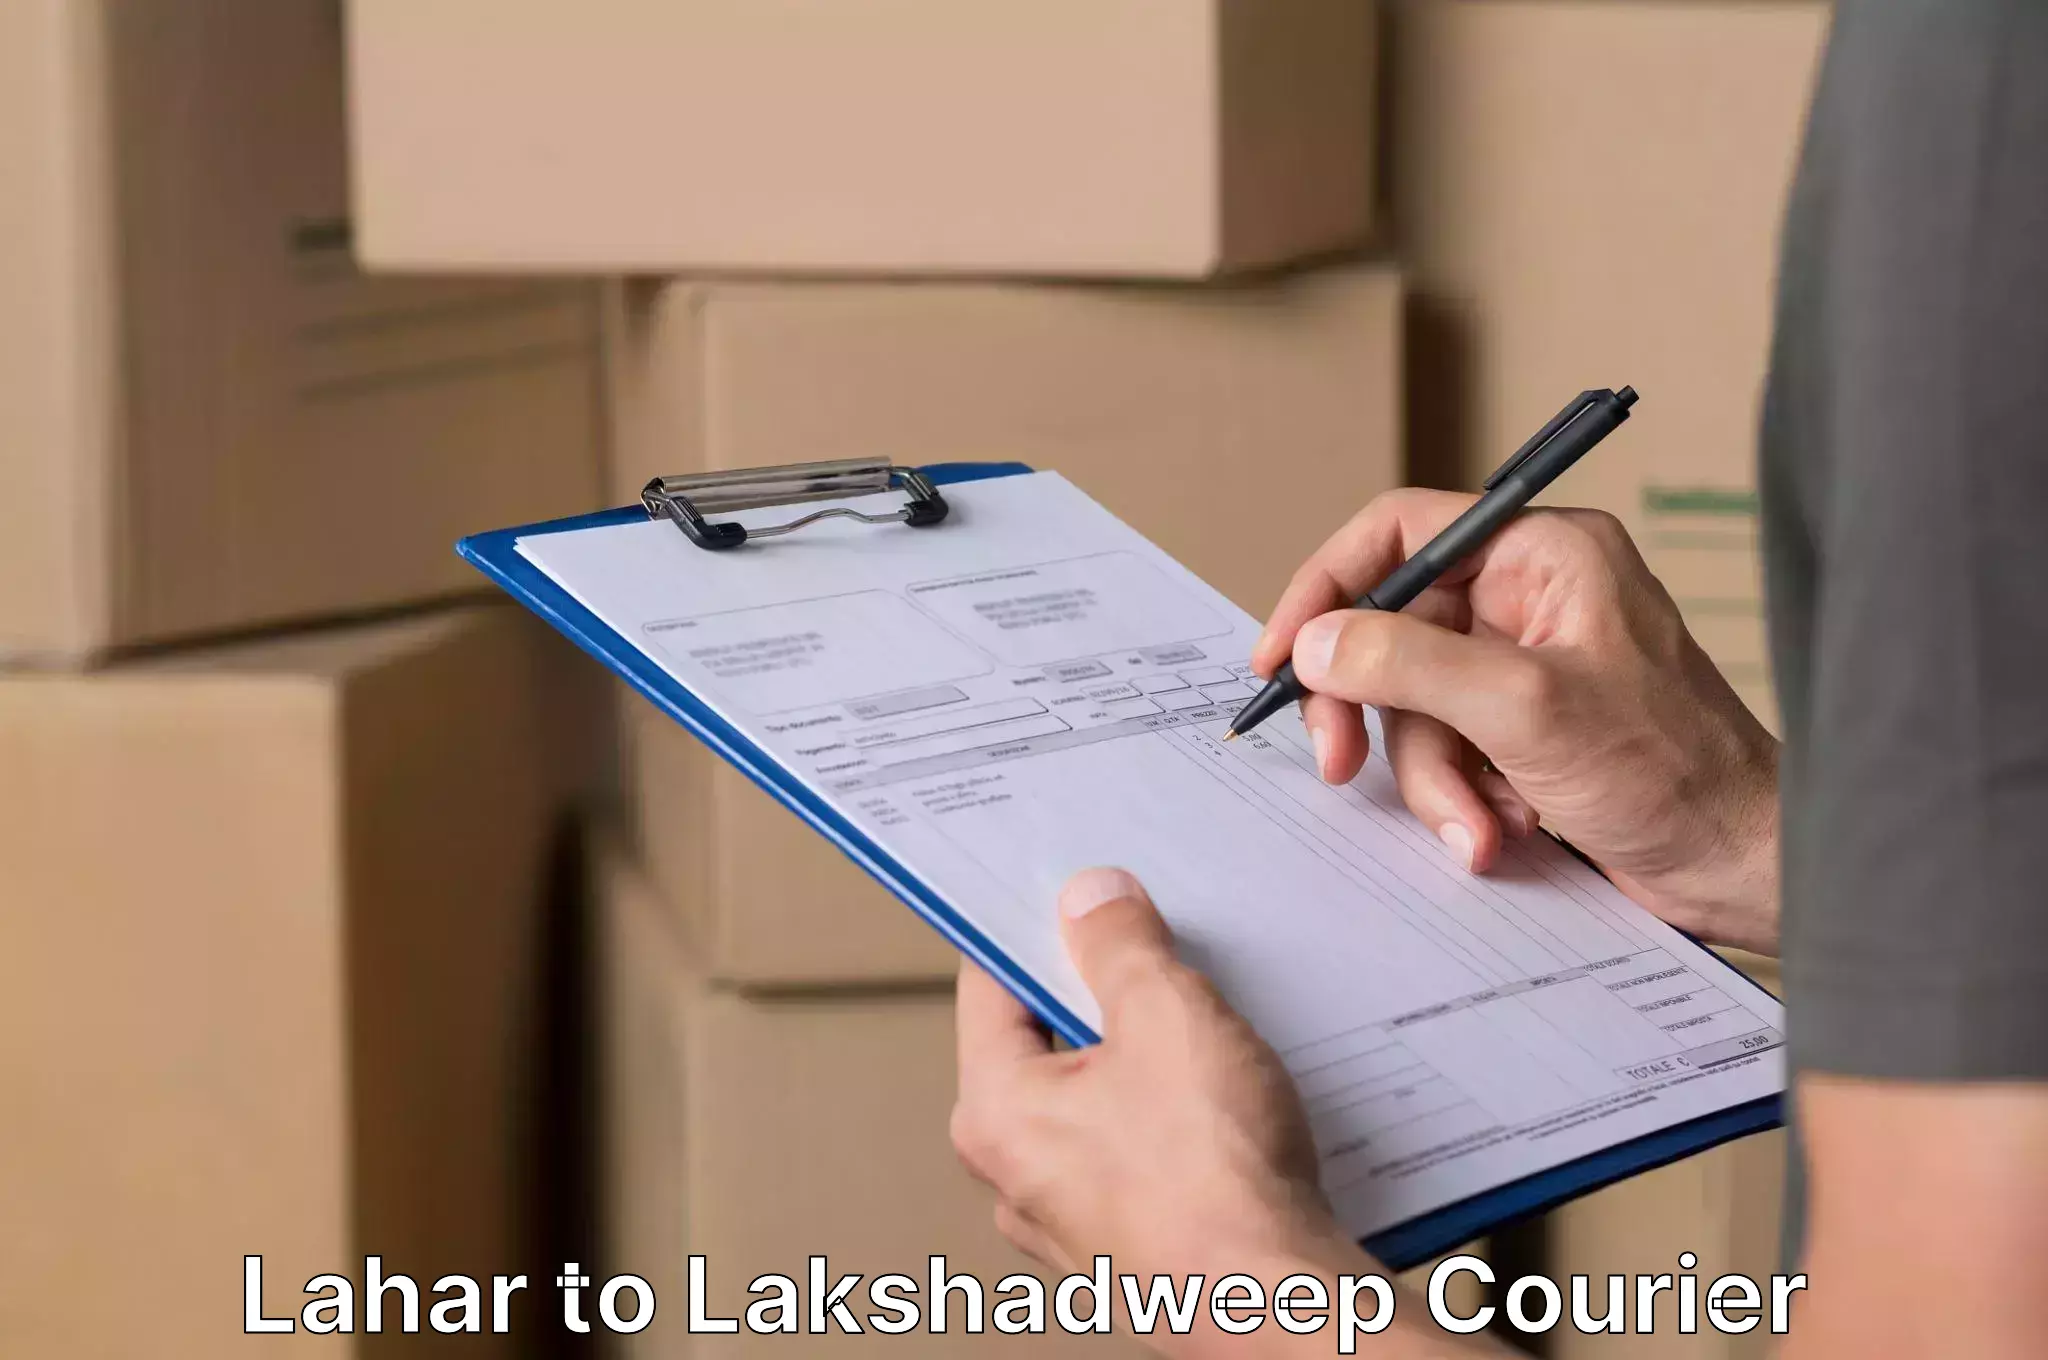 Reliable relocation services Lahar to Lakshadweep